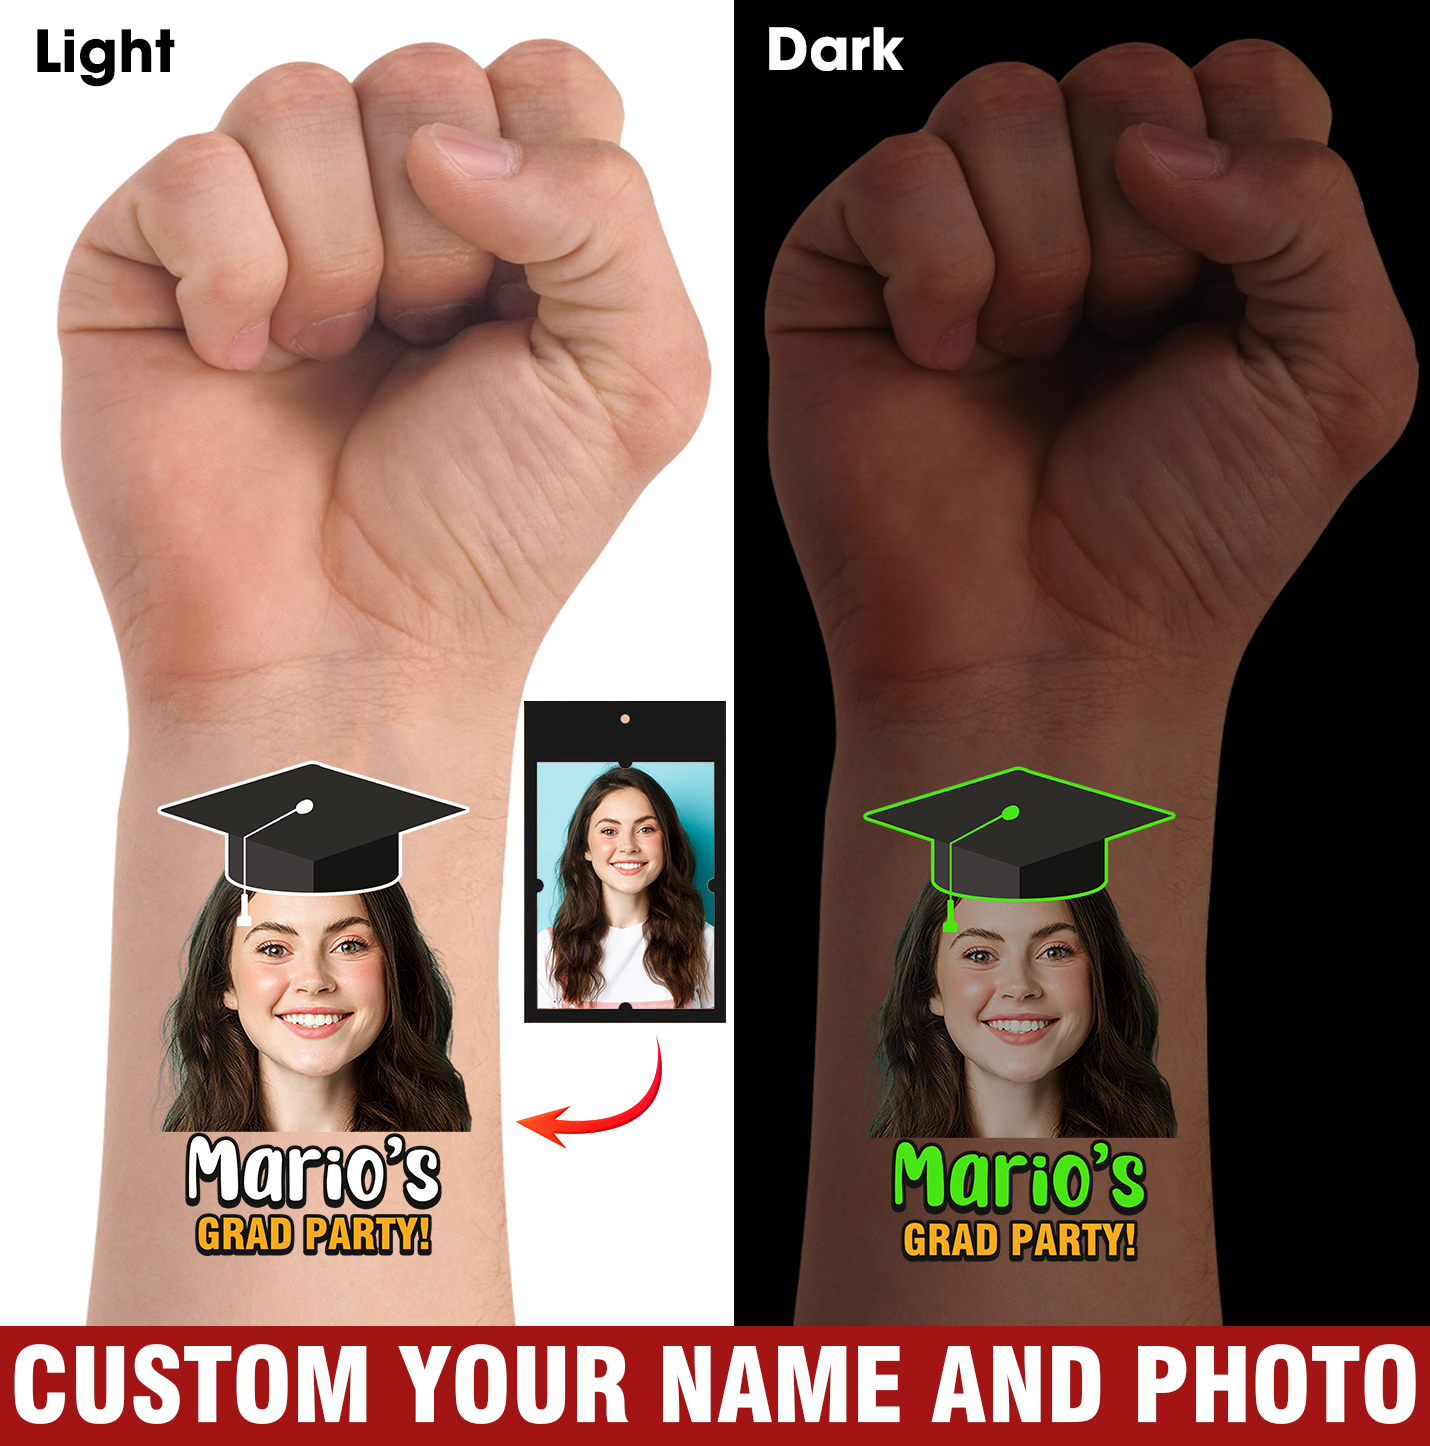 Grad Party, Custom Temporary Tattoo With Personalized Photo And Texts, Fake Tattoo